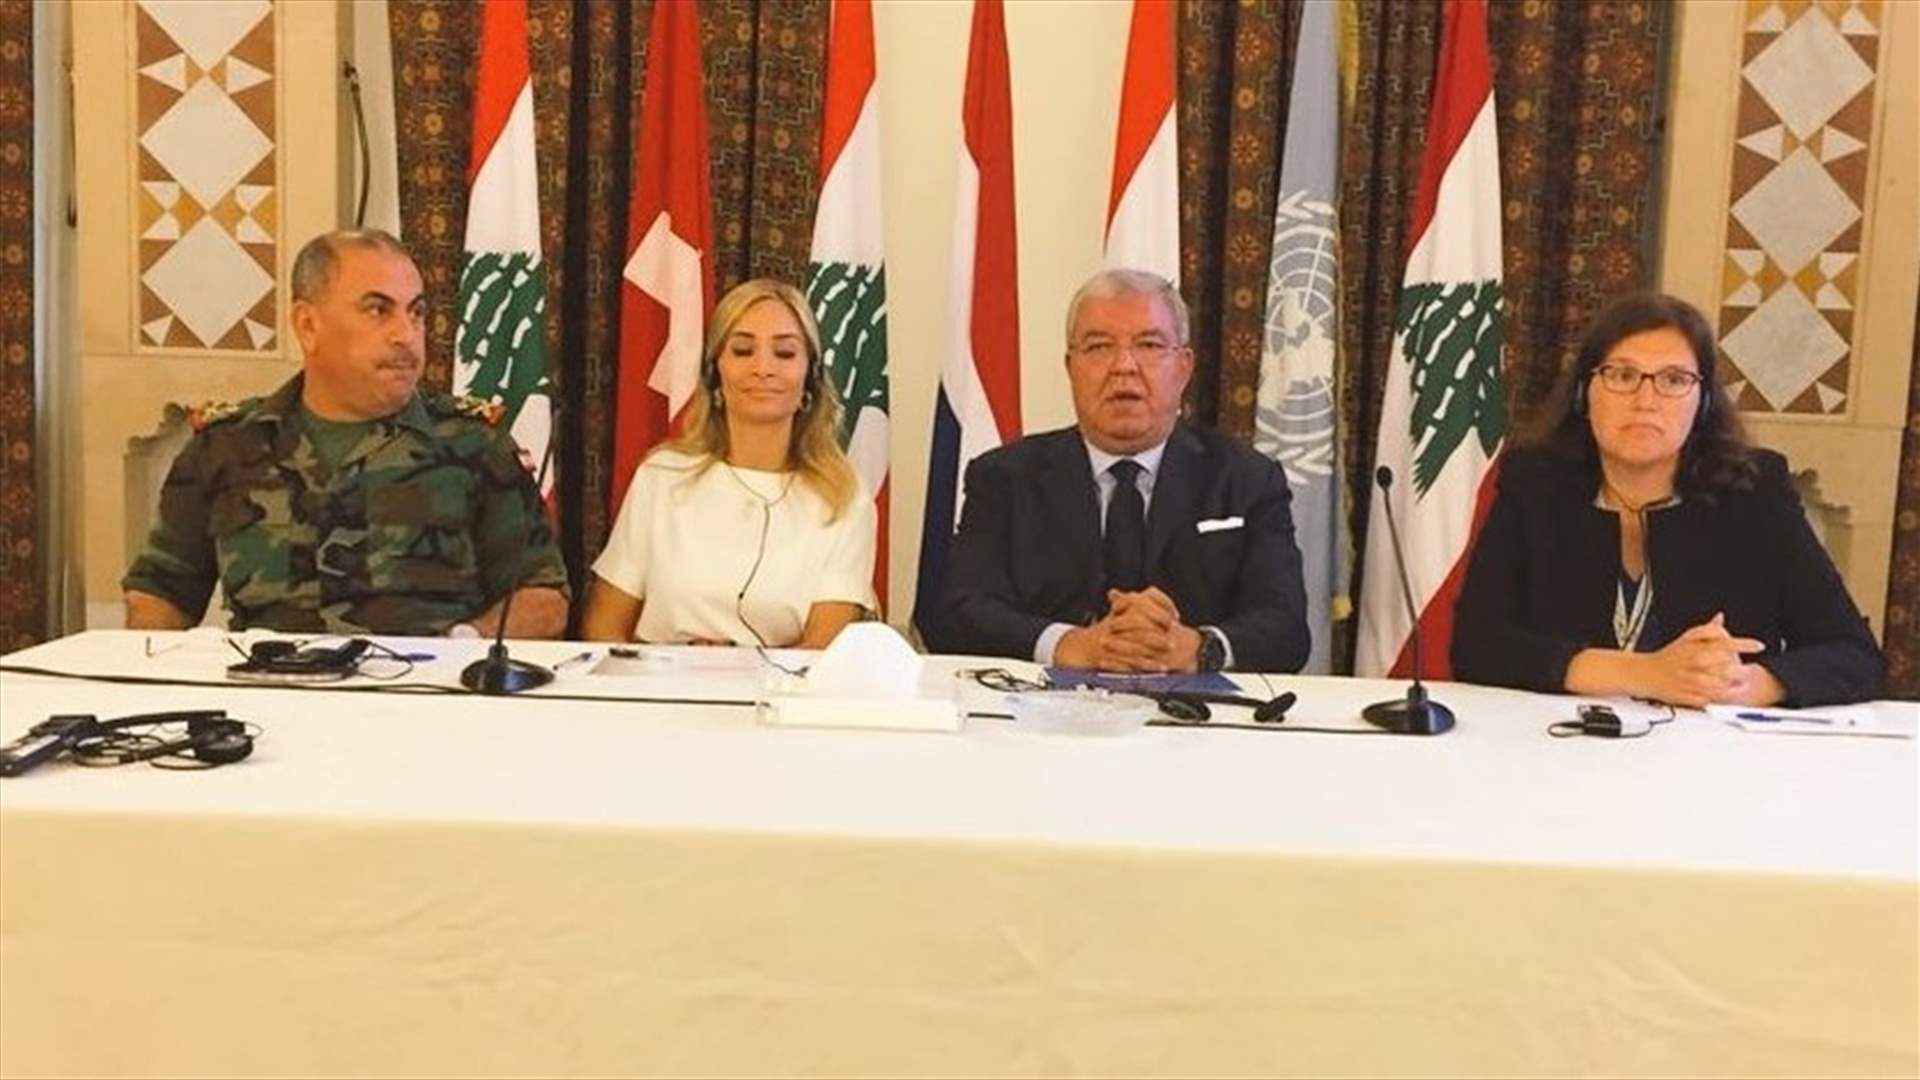 Minister al-Mashnouq says Lebanon is facing a new form of terrorism